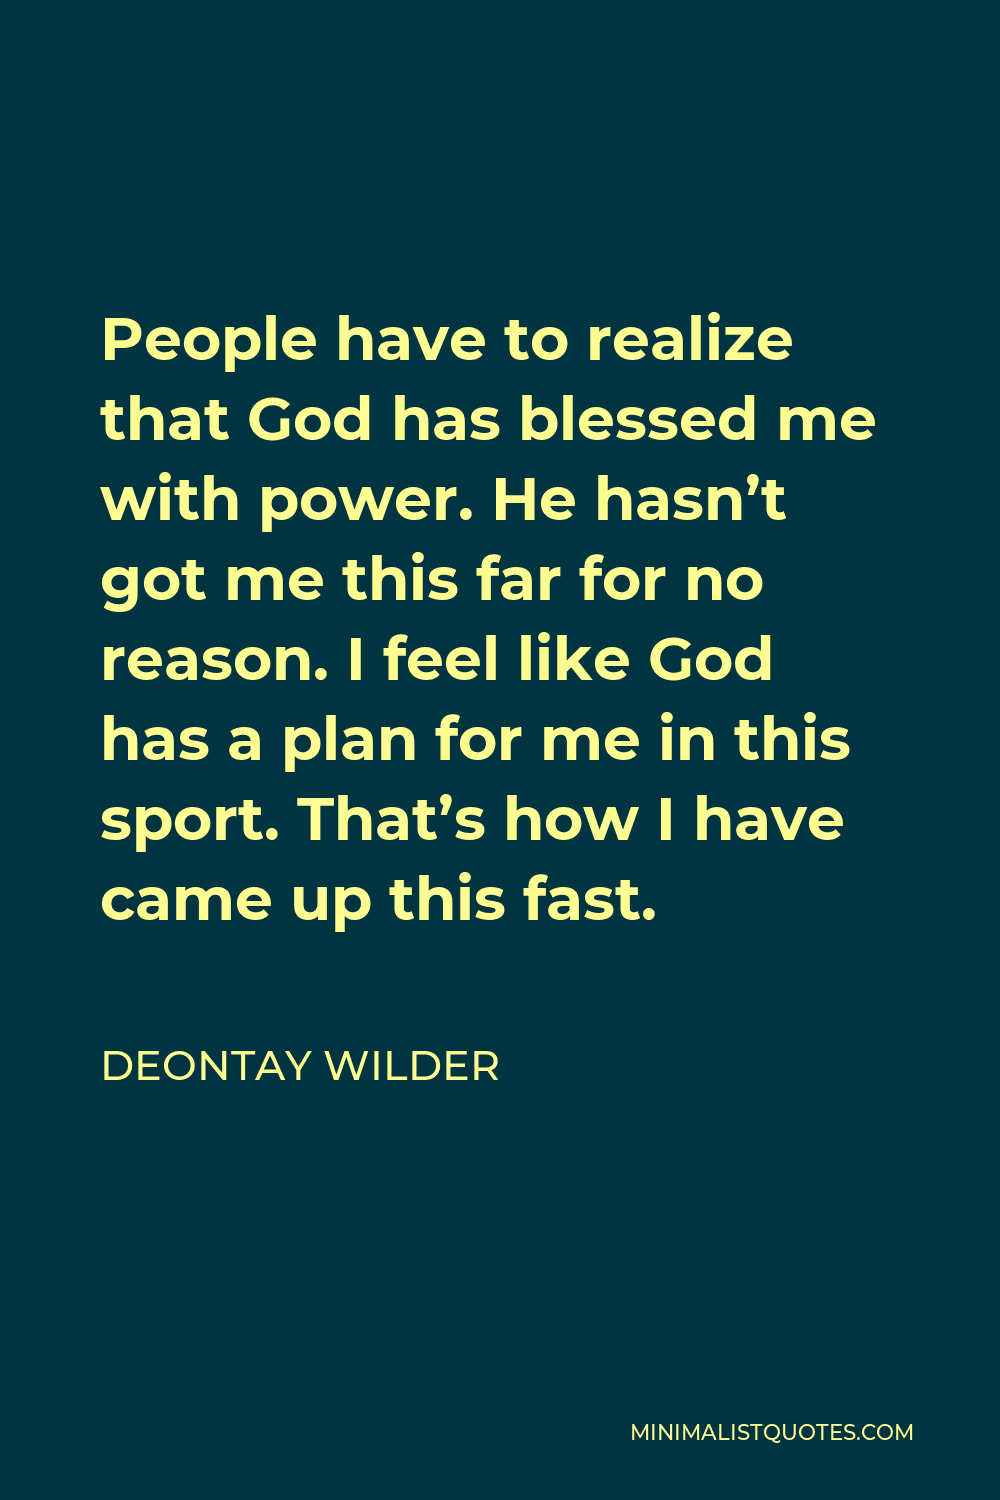 Deontay Wilder Quote - People have to realize that God has blessed me with power. He hasn’t got me this far for no reason. I feel like God has a plan for me in this sport. That’s how I have came up this fast.